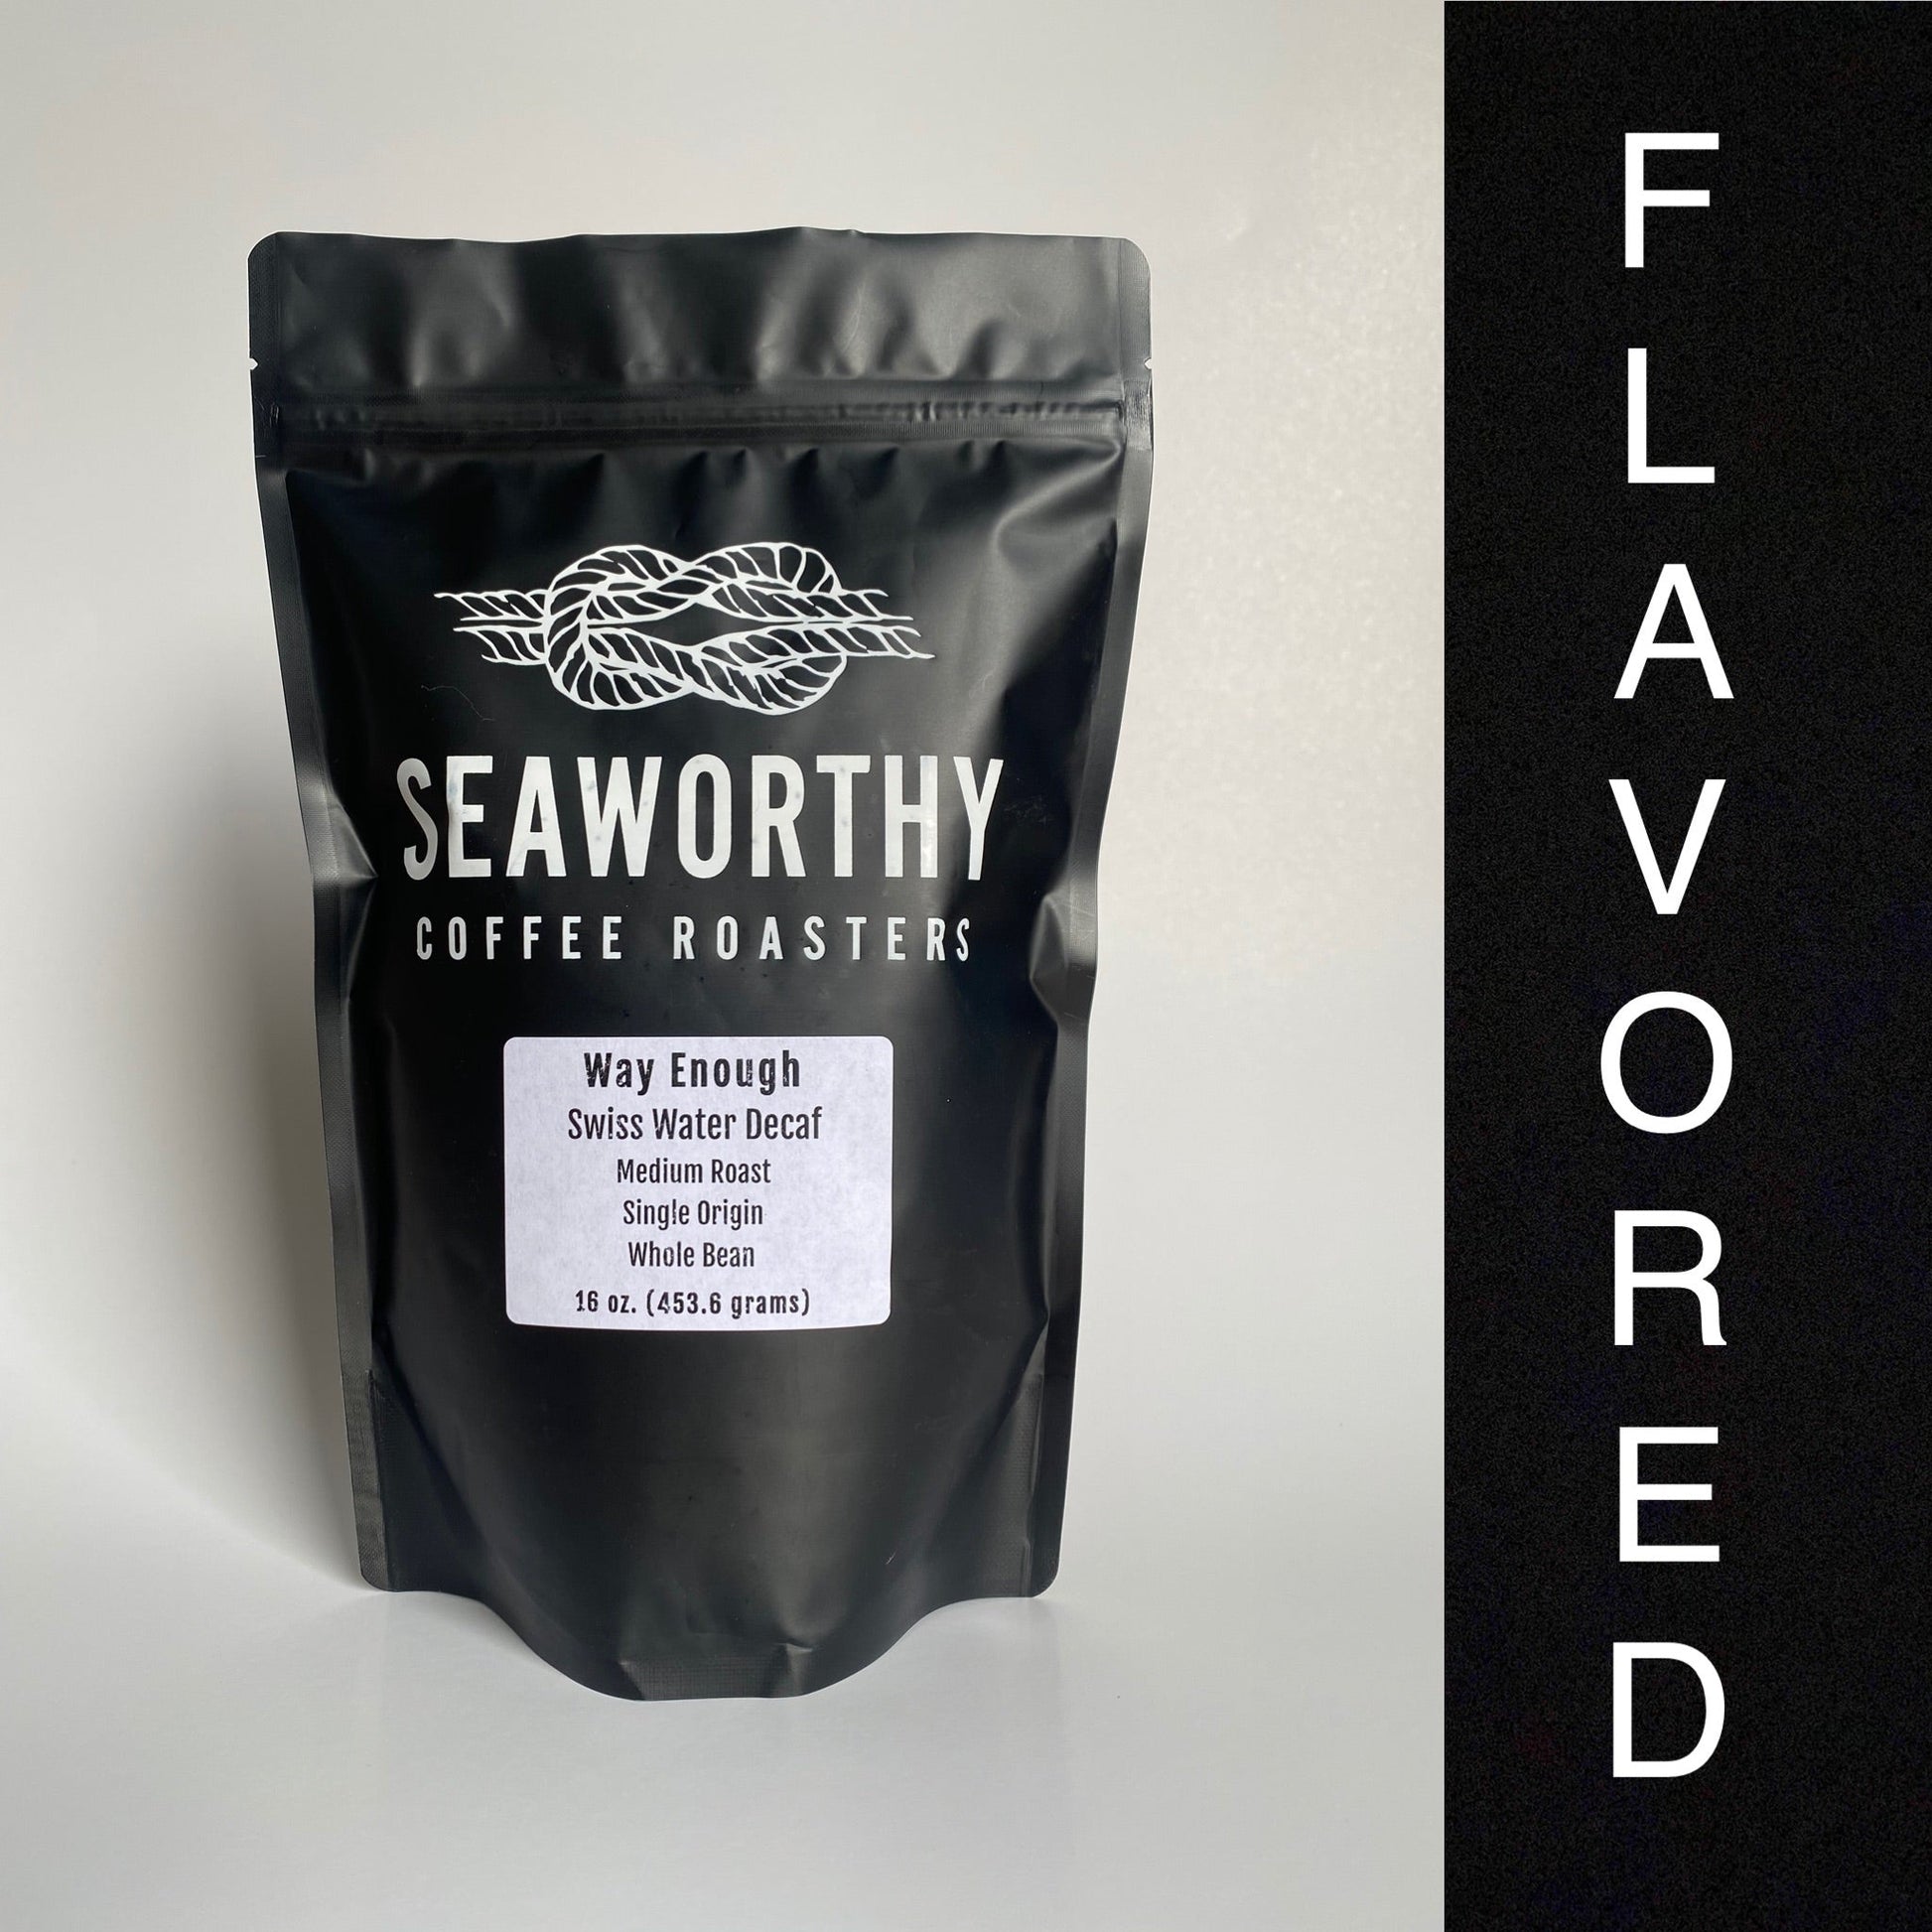 Seaworthy slow roasted, small batch coffee. Flavored Swiss Water Decaf is available in every flavor we currently offer, leaving you with no caffeine and a lot of choices, including seasonal flavors!  Did we mention our flavors are allergen free and contain no sugar?  Just delicious decaf coffee paired with tasty flavors—a treat that can be enjoyed any time of the day or night. 